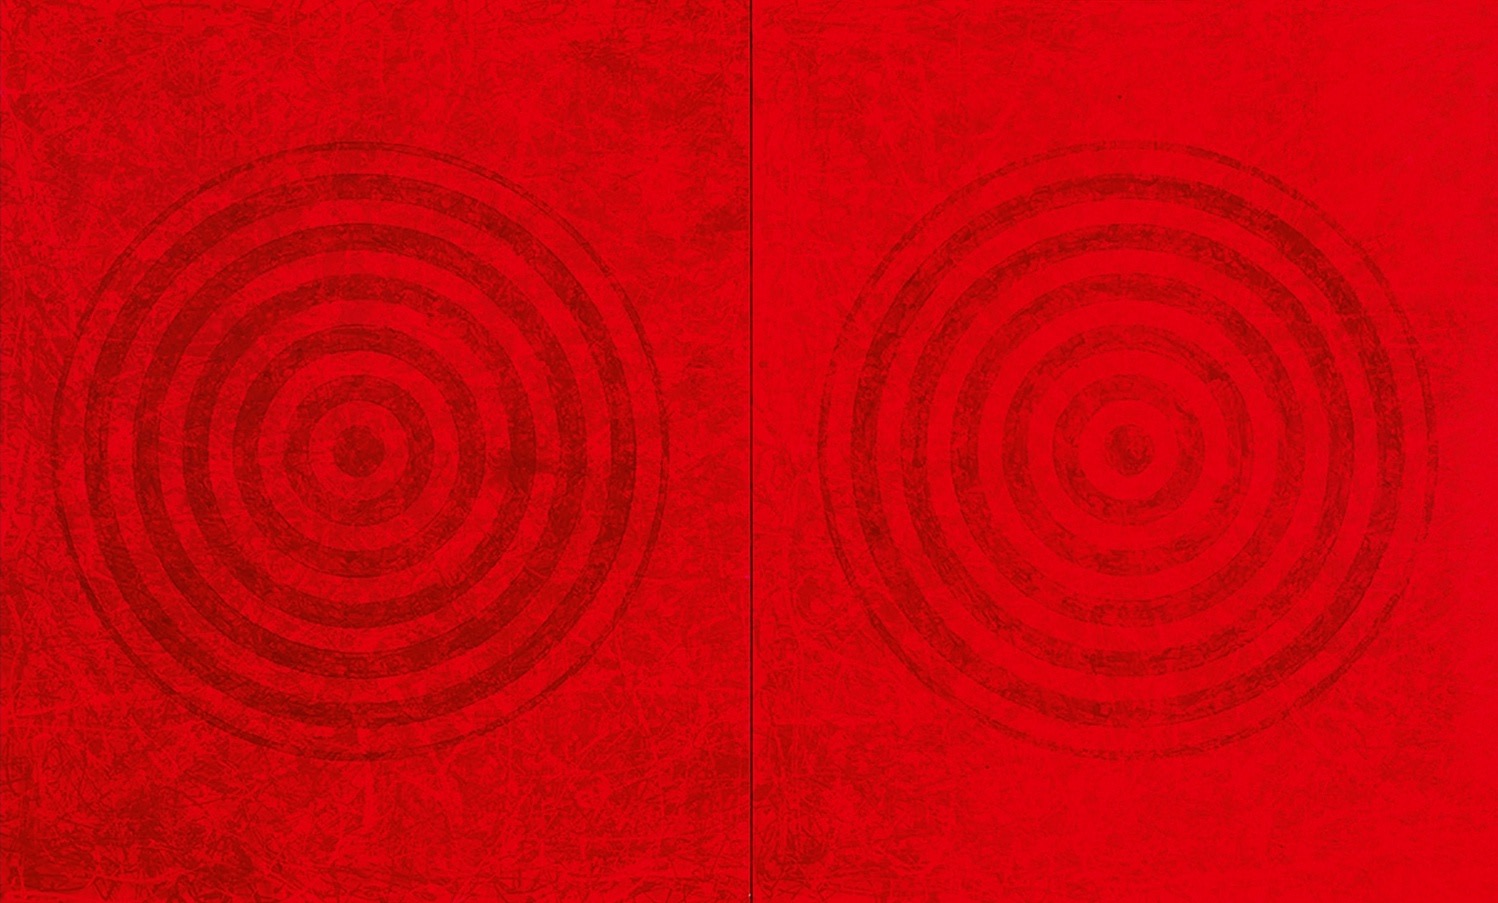 J. Steven Manolis, Redworld-Concentric, 2016, 72 x 120 inches, 72.120.01, Red Abstract Art, Large Abstract Wall Art for sale at Manolis Projects Art Gallery, Miami, Fl